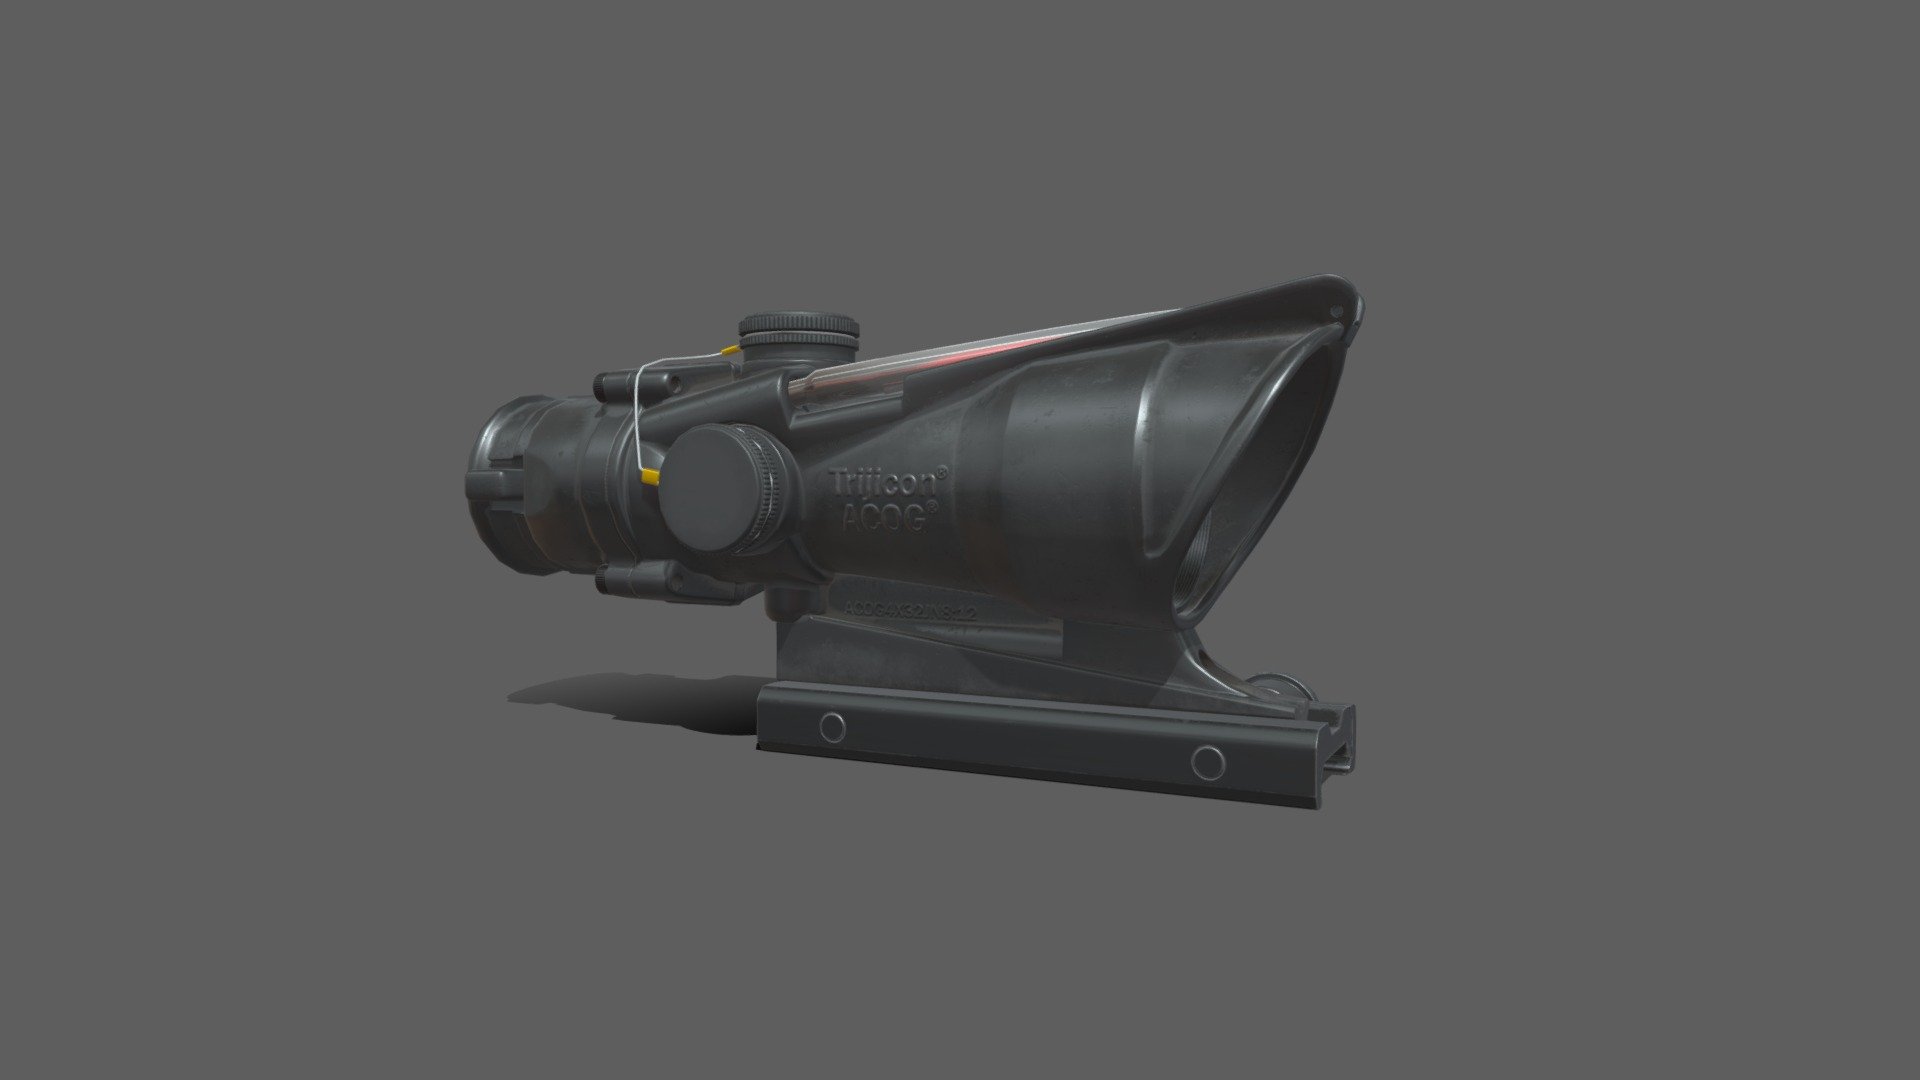 This is my attempt at the Trilux ACOG 4x Scope, love to hear your feedback!
https://www.artstation.com/artwork/68Wwyw - Trilux ACOG 4x Scope - 3D model by Lin0004 3d model